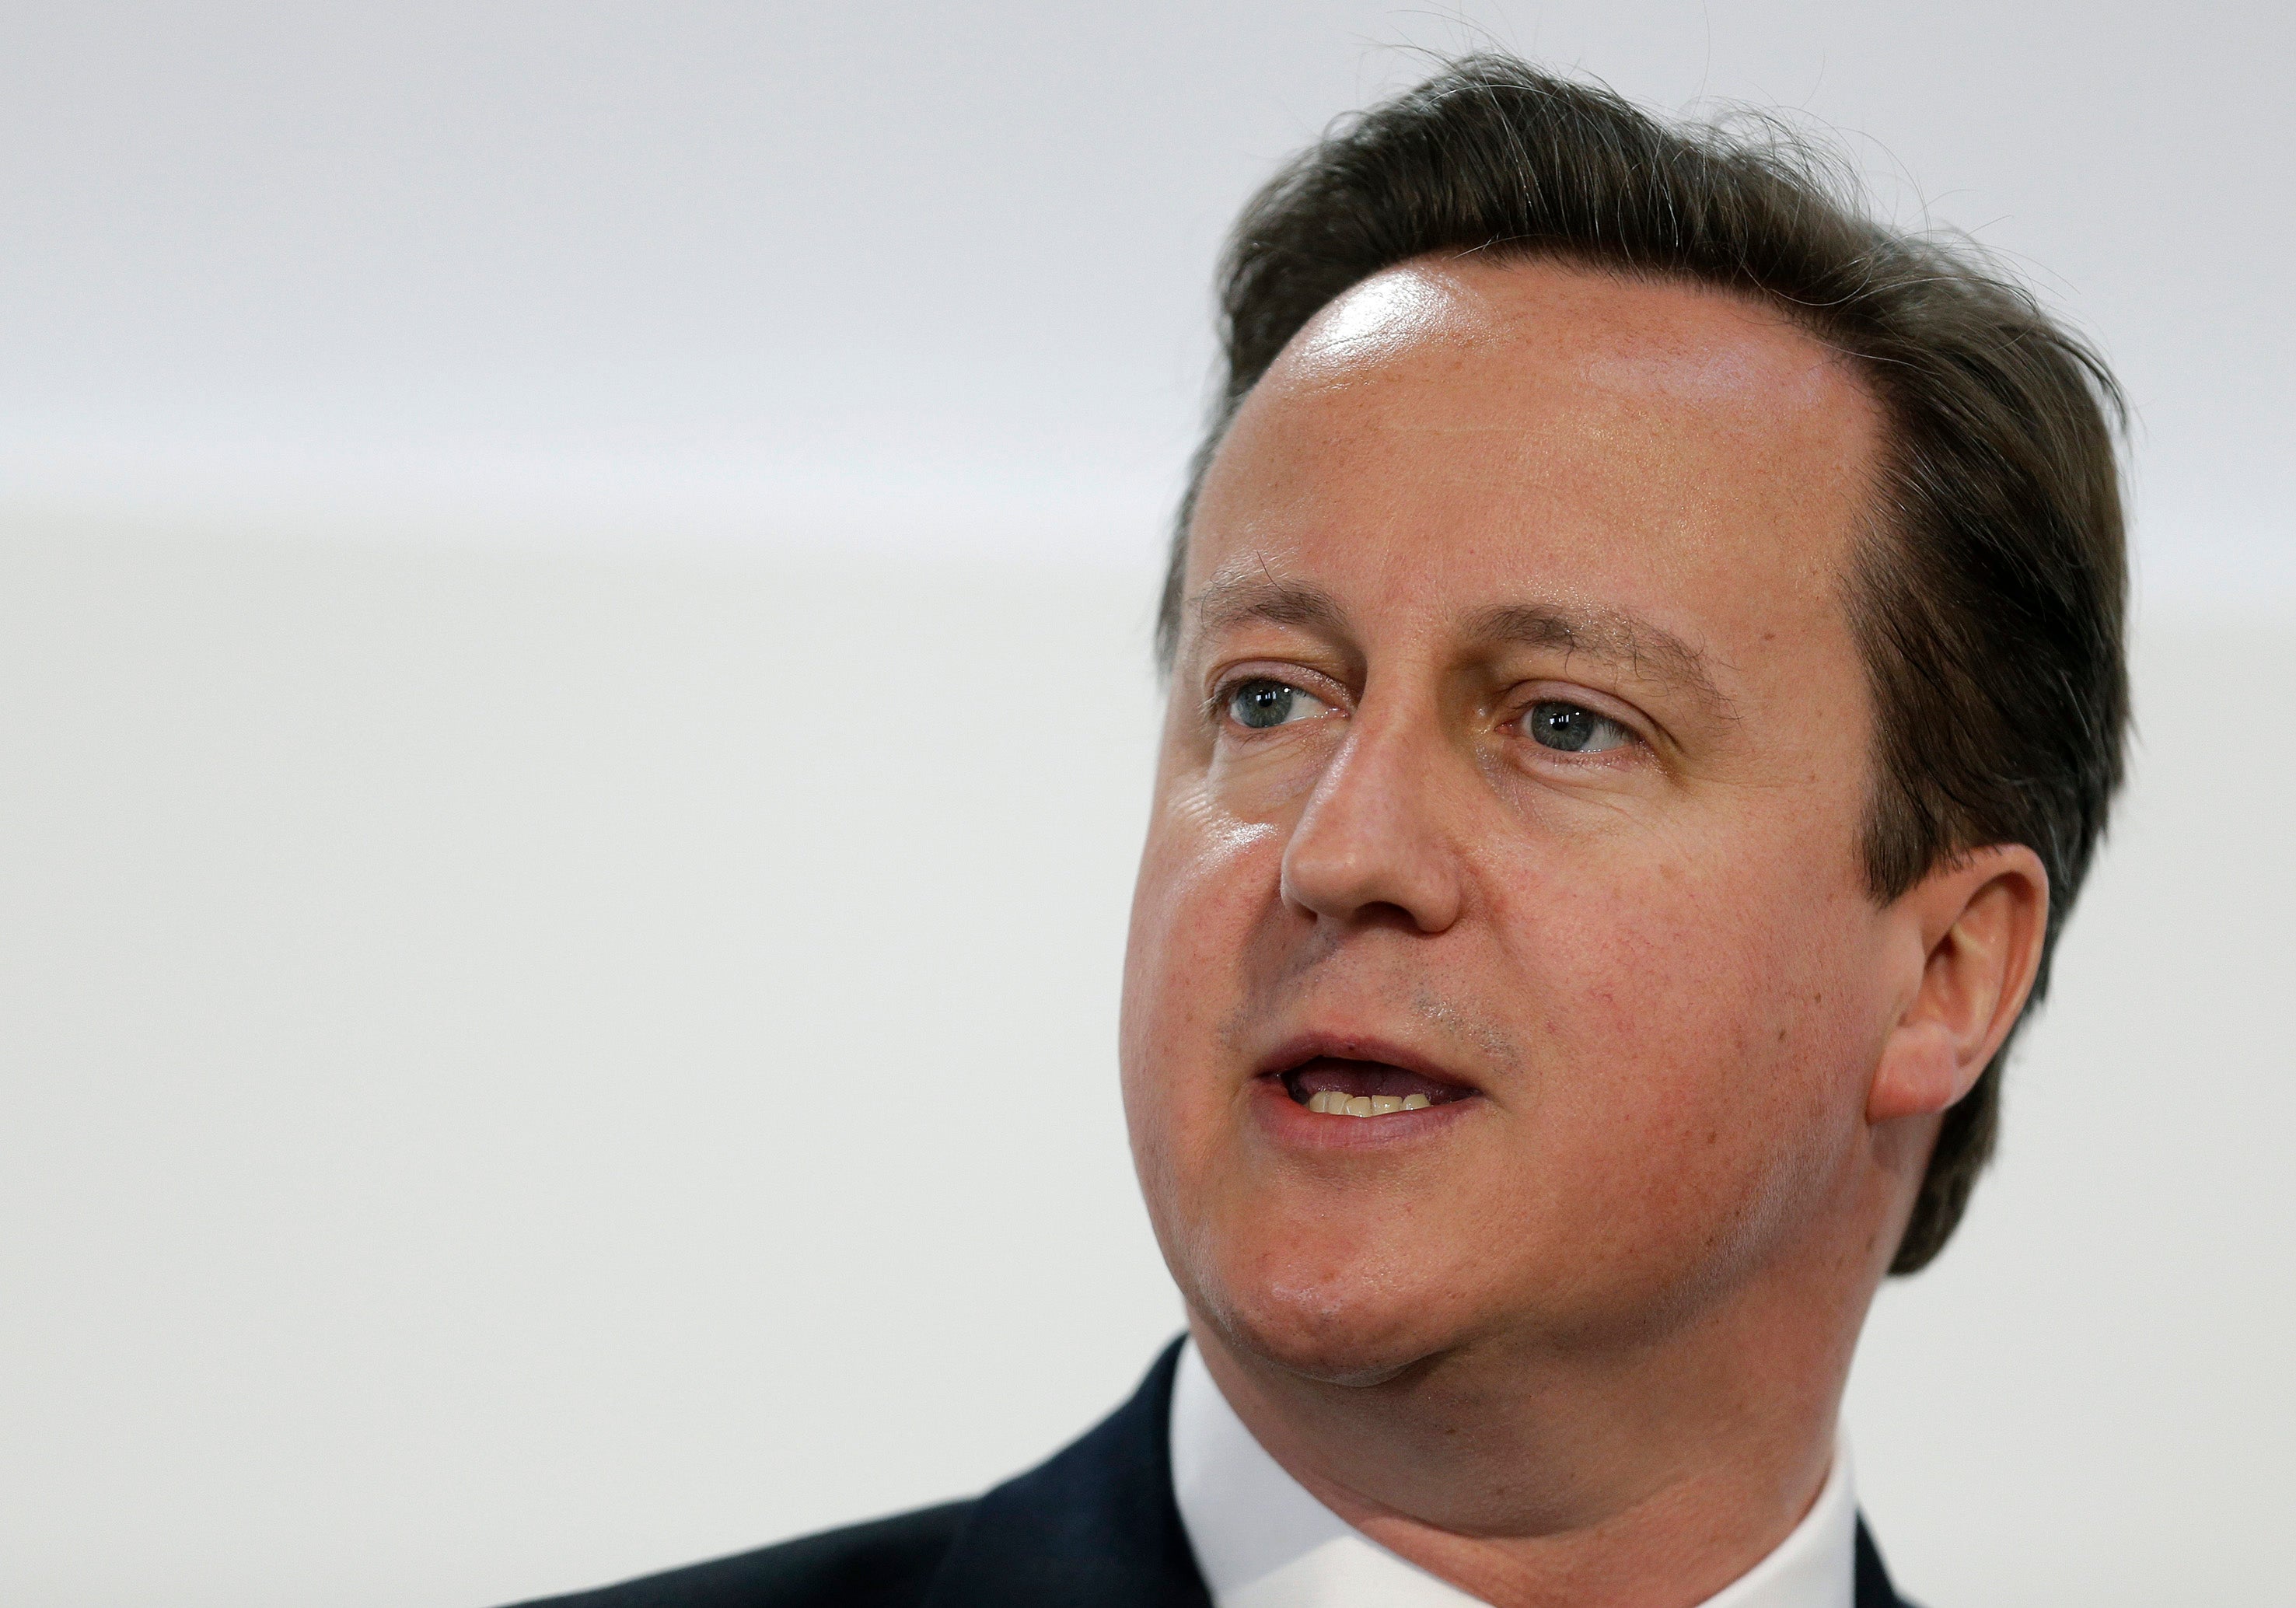 David Cameron has said he is "not convinced" by assisted dying bill